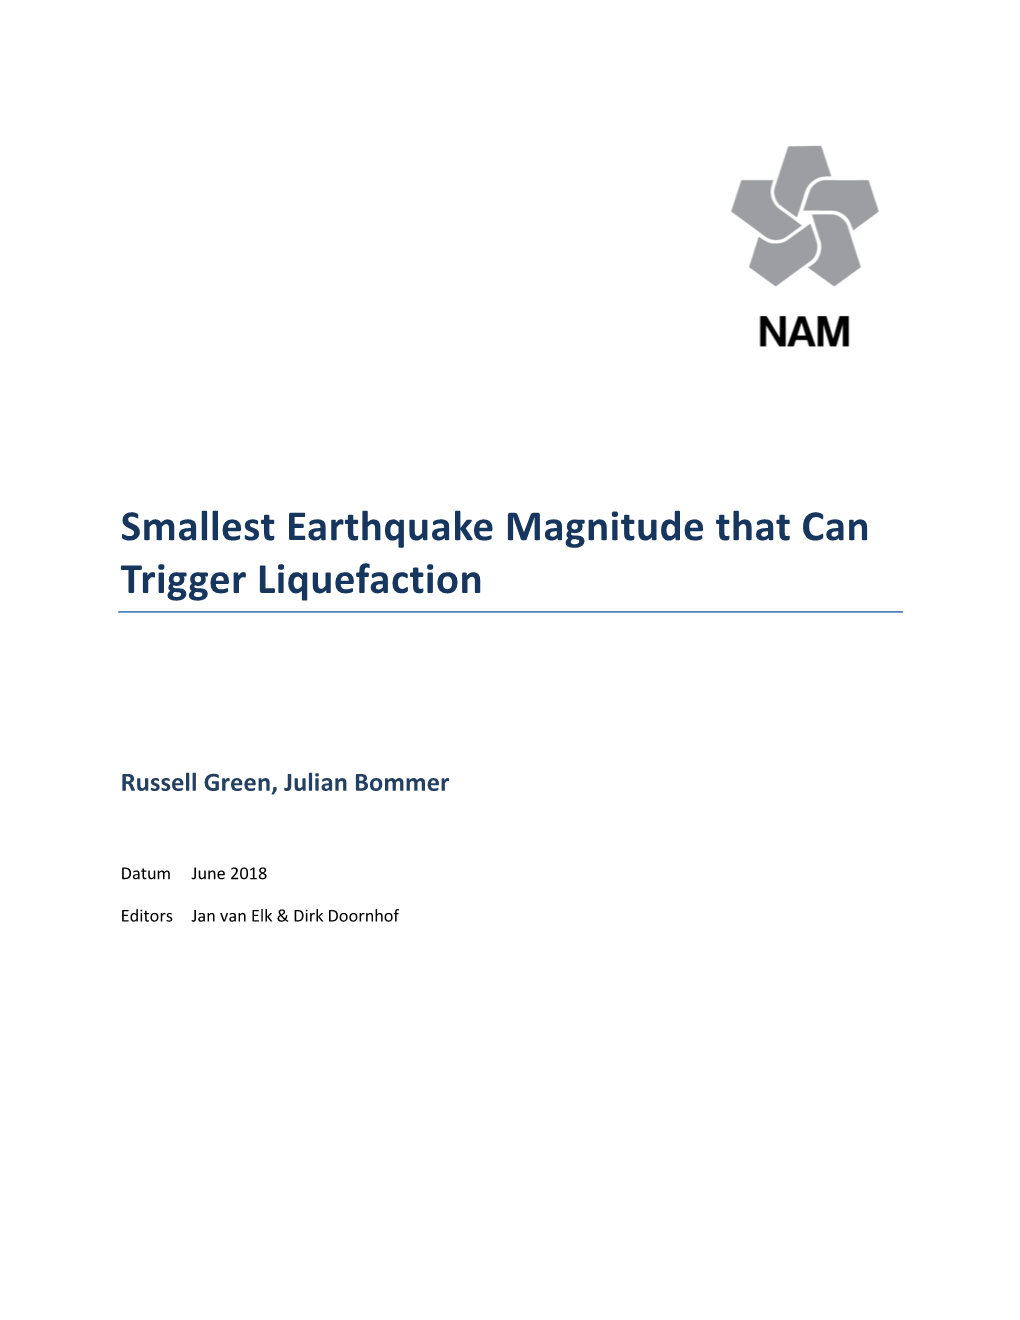 Smallest Earthquake Magnitude That Can Trigger Liquefaction